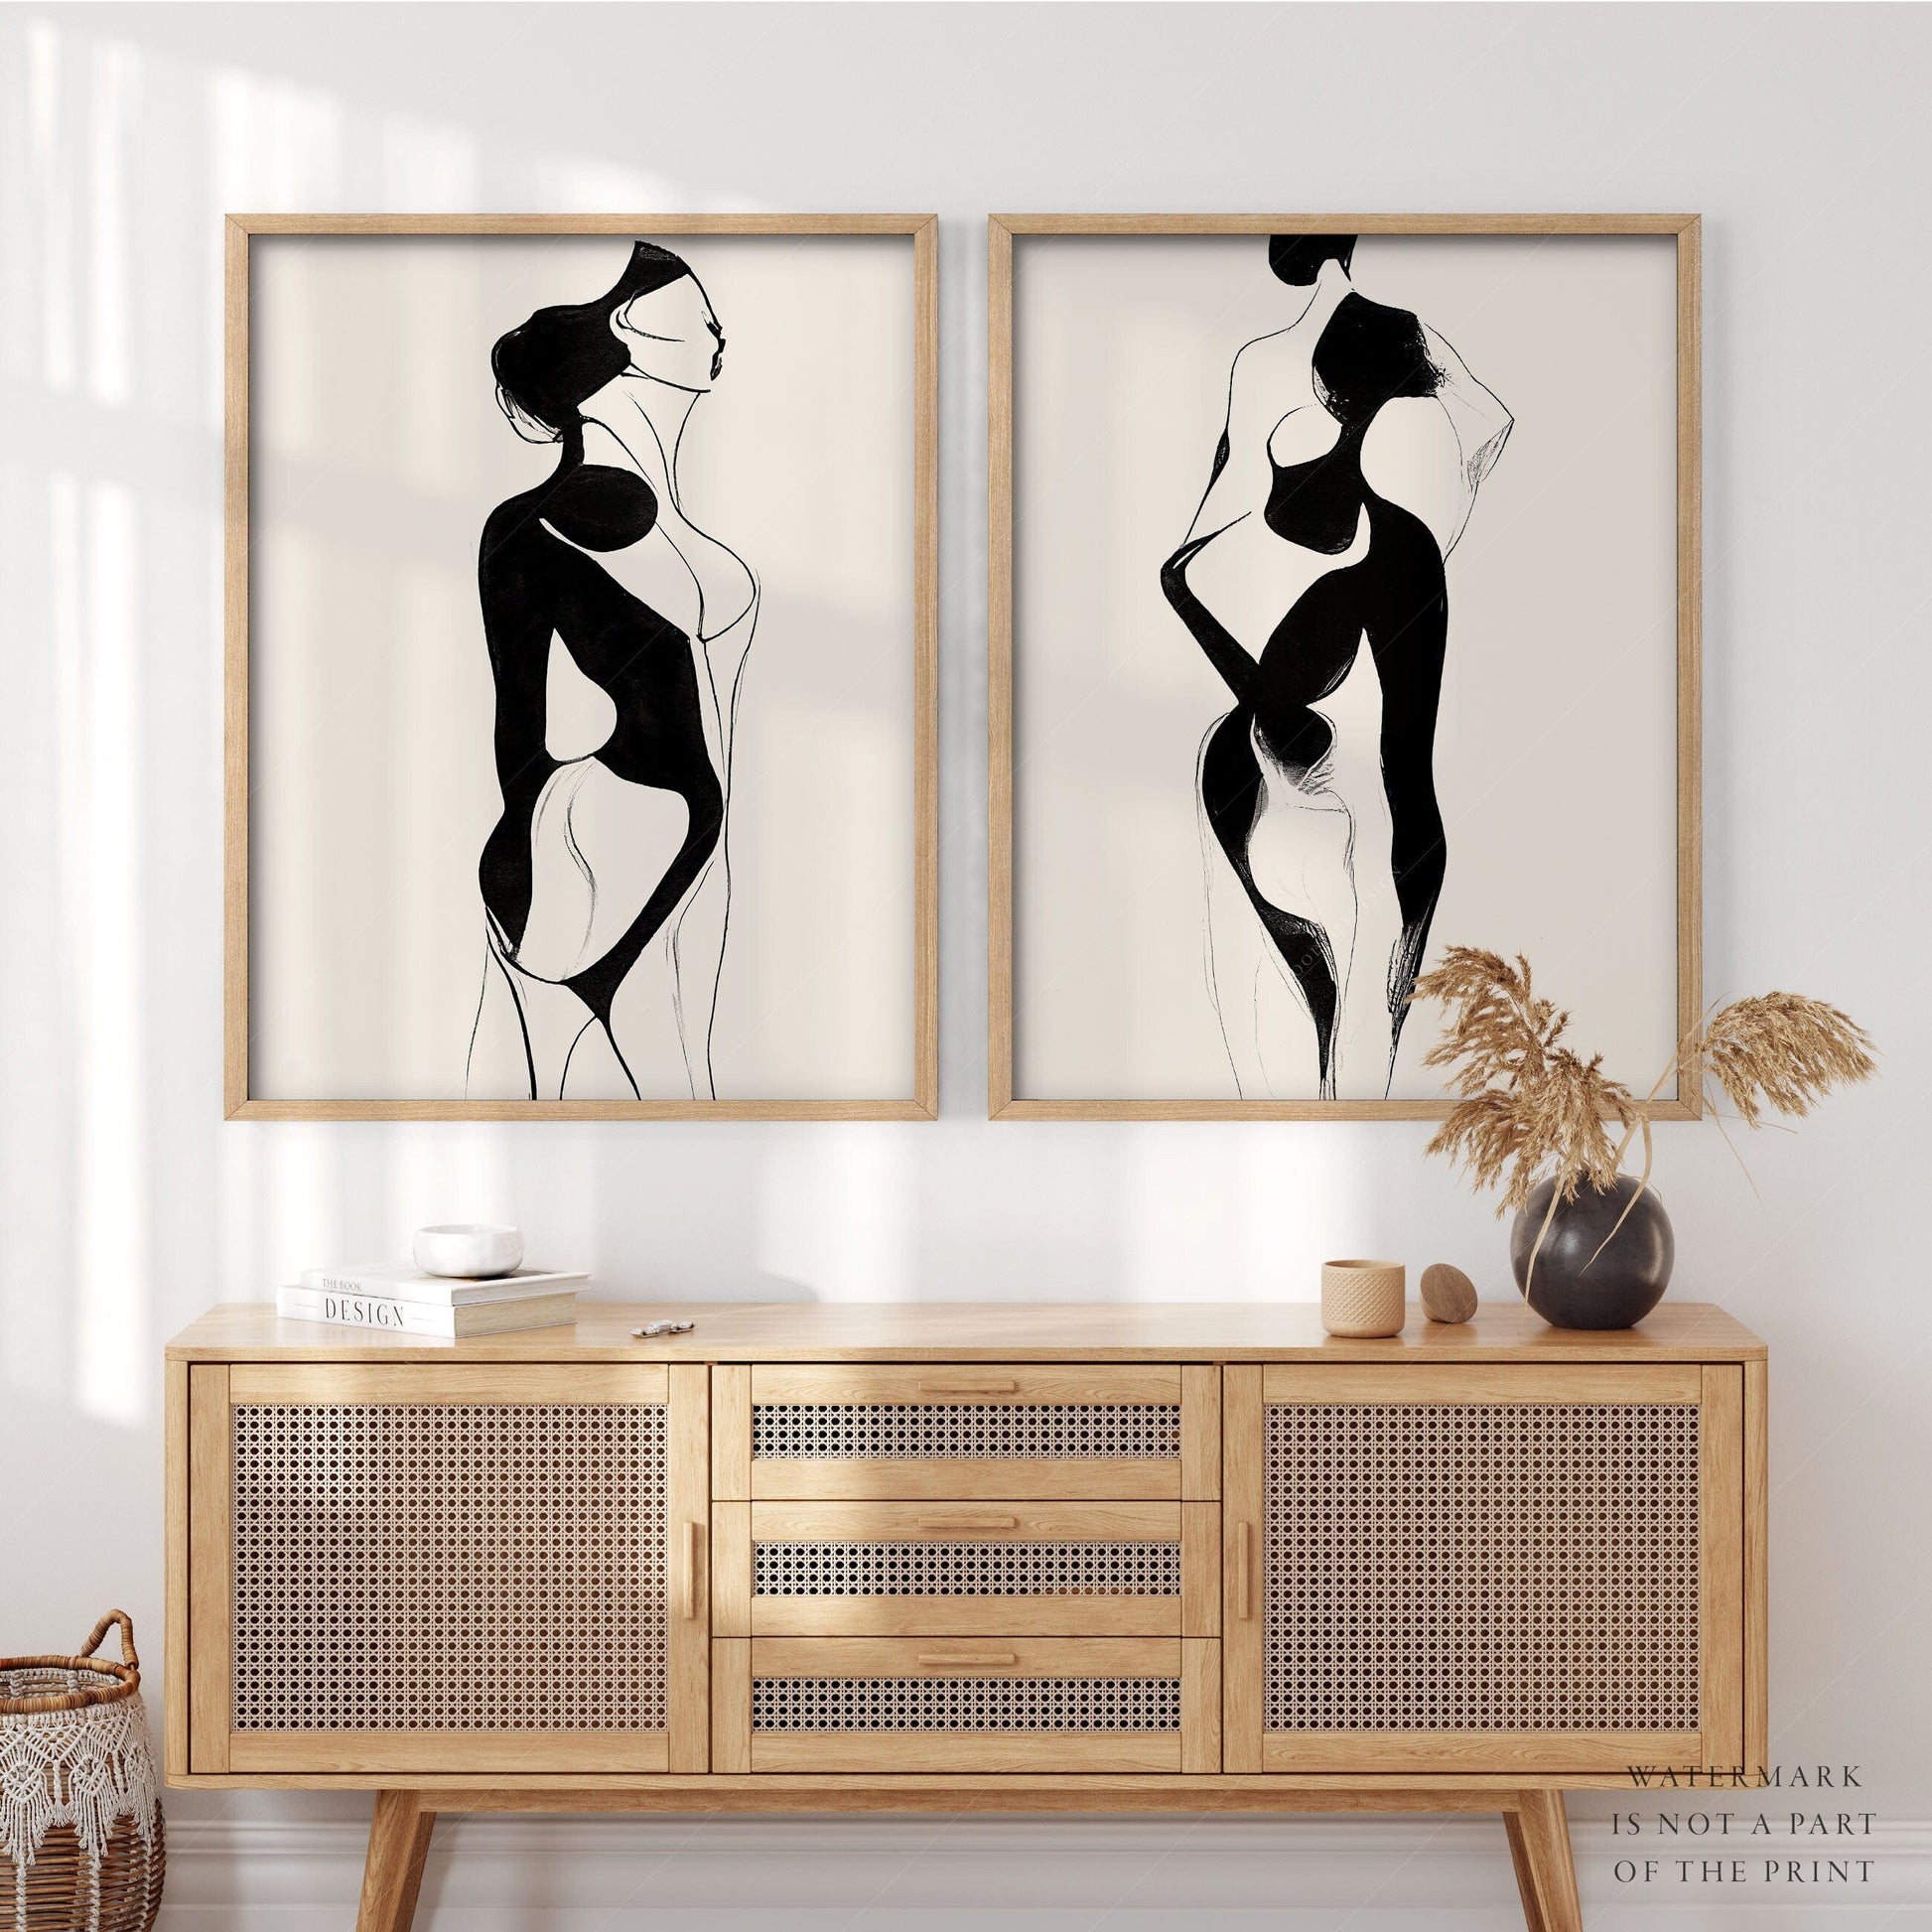 Home Poster Decor Set of 2 One Line Drawing, Female Body Wall Art, Set of 2 Print, Woman Body Minimalist, Black White, Modern Home Decor, Bedroom Wall Decor, Gift Idea